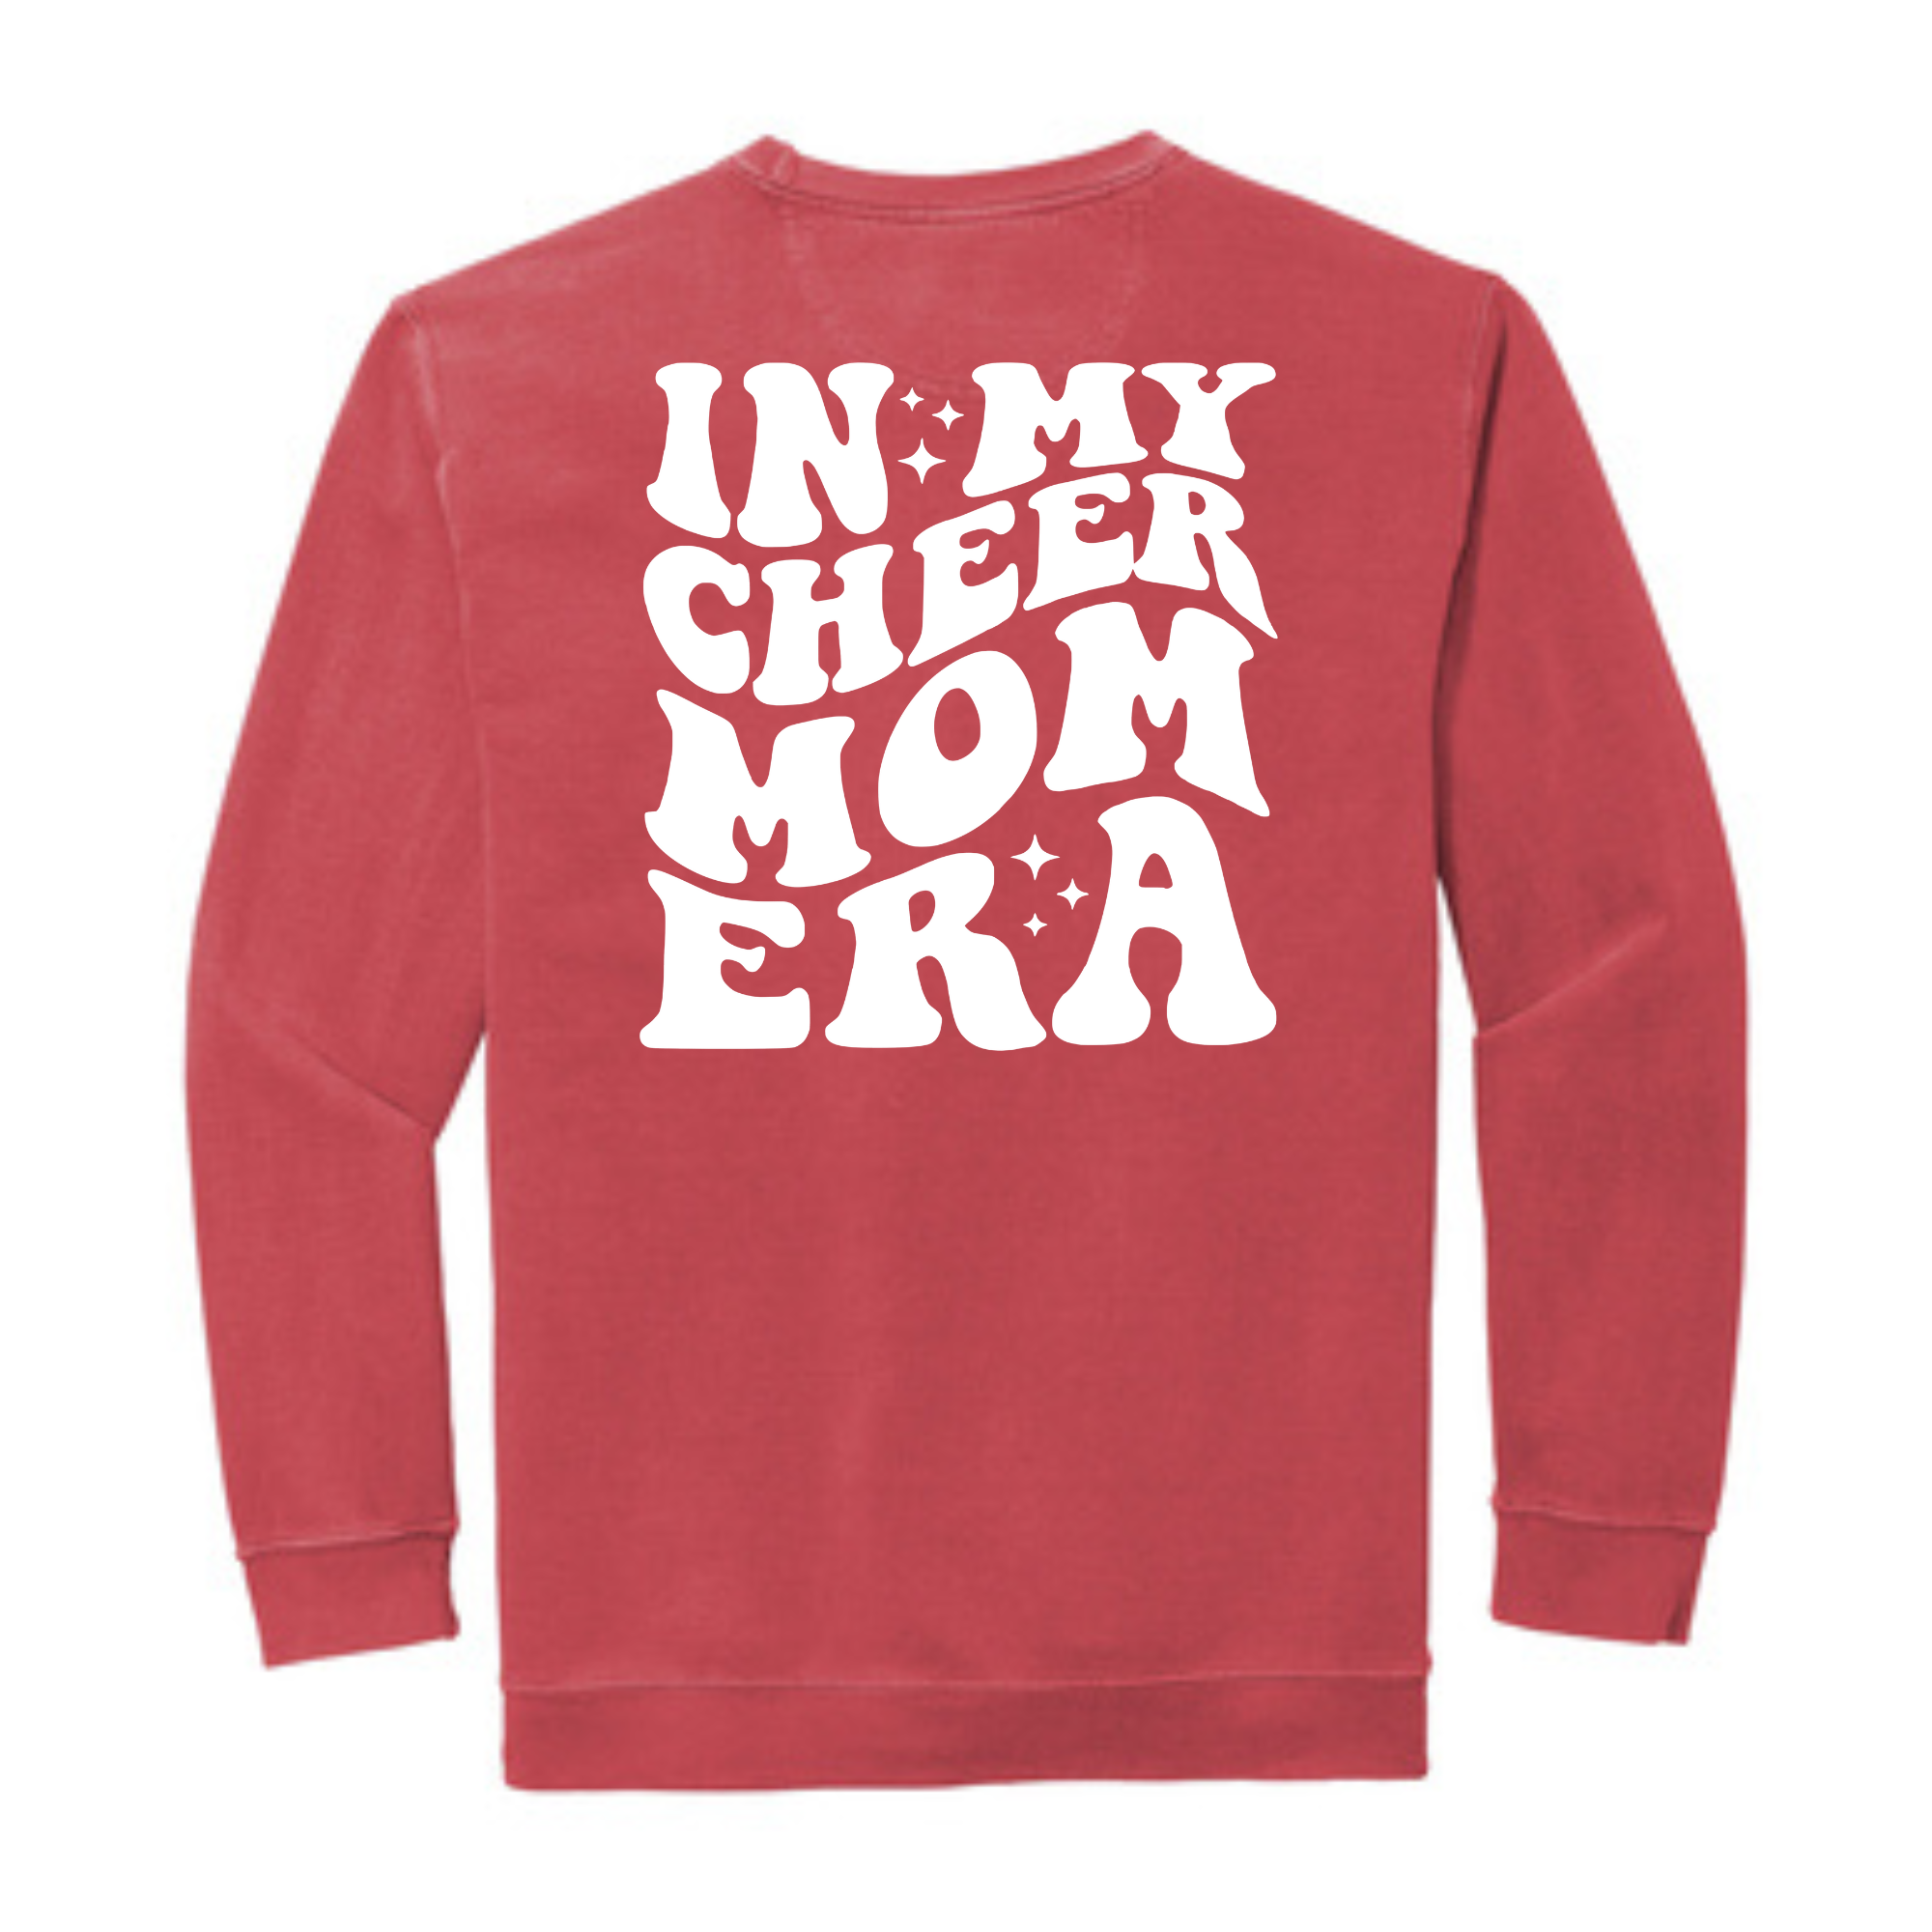 Central In My Cheer Mom Crewneck- 1566